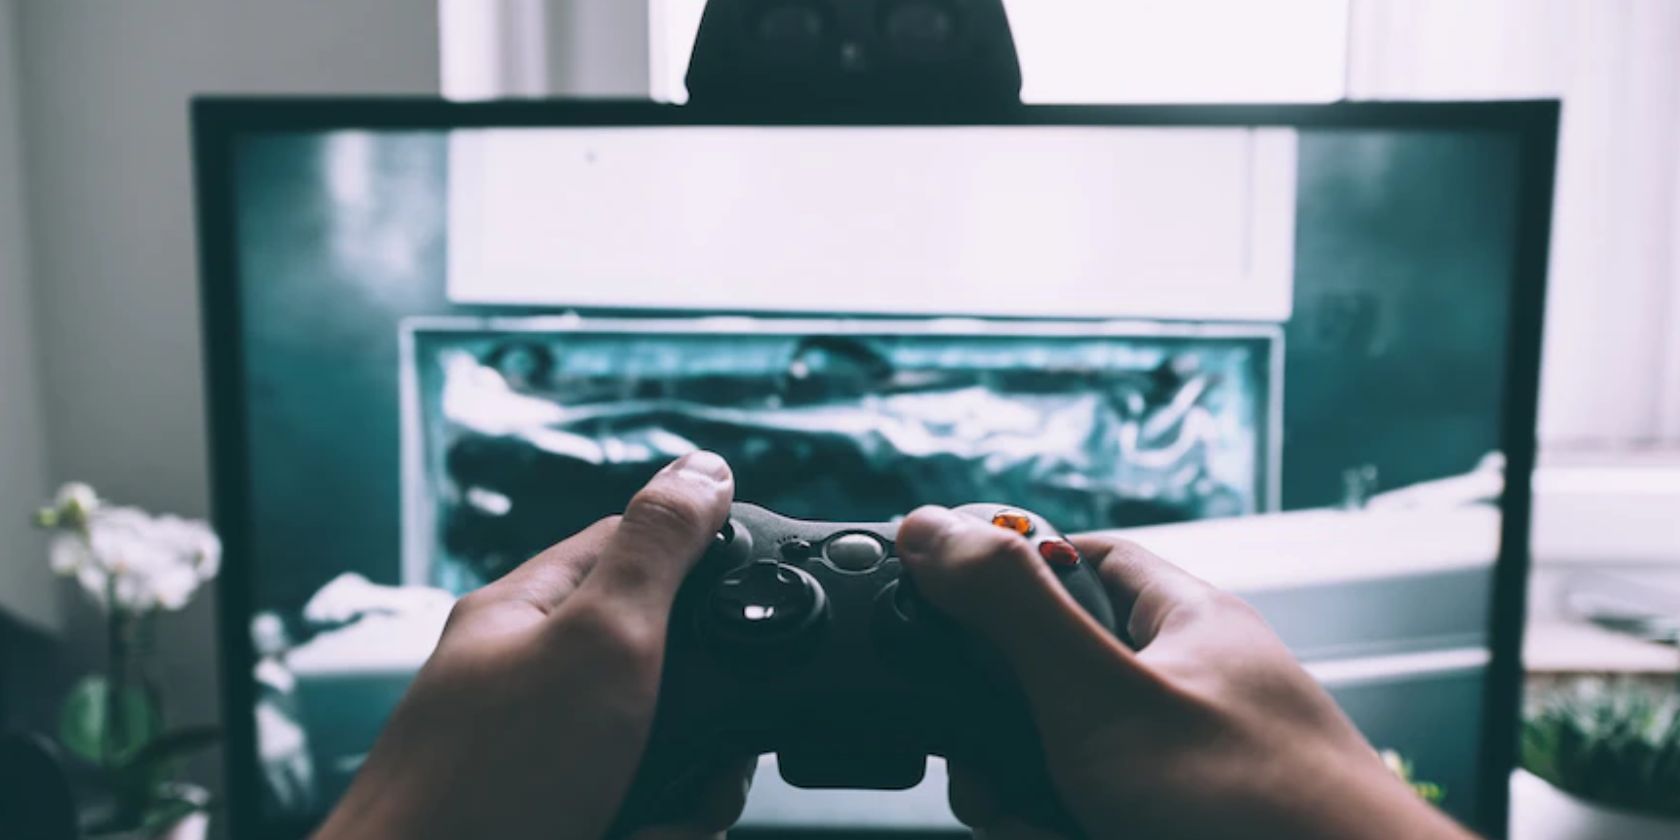 Monitor displaying a video game with hands holding a controller in front of the screen.